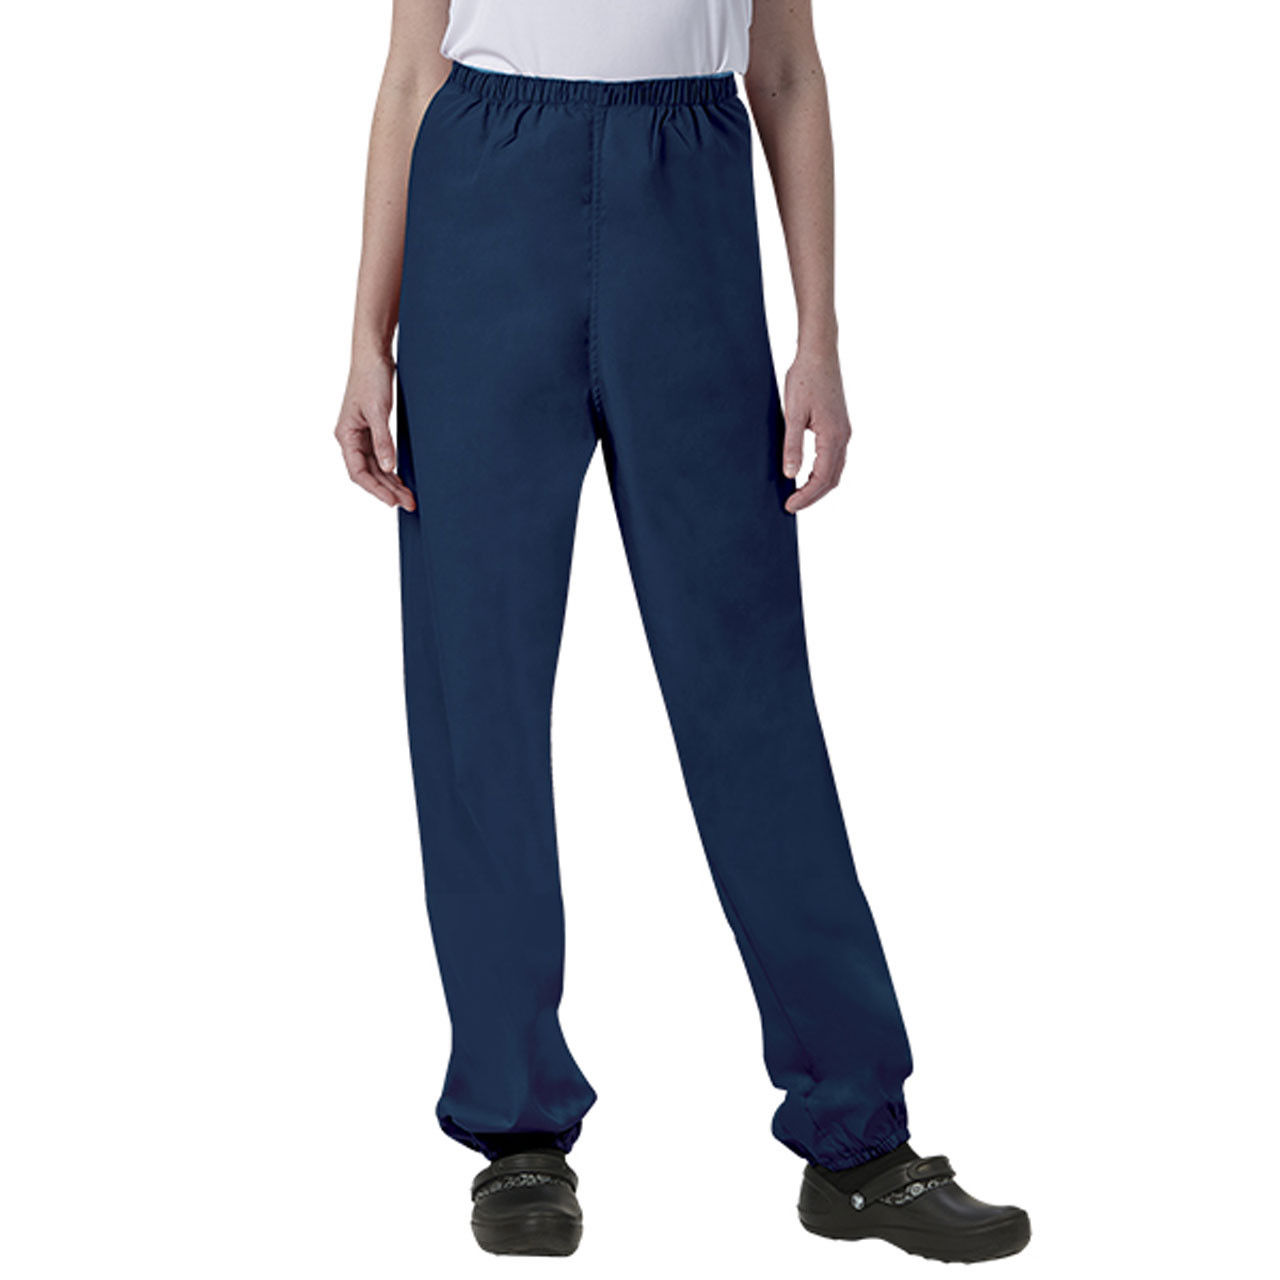 Do these cotton scrub pants come with pockets?